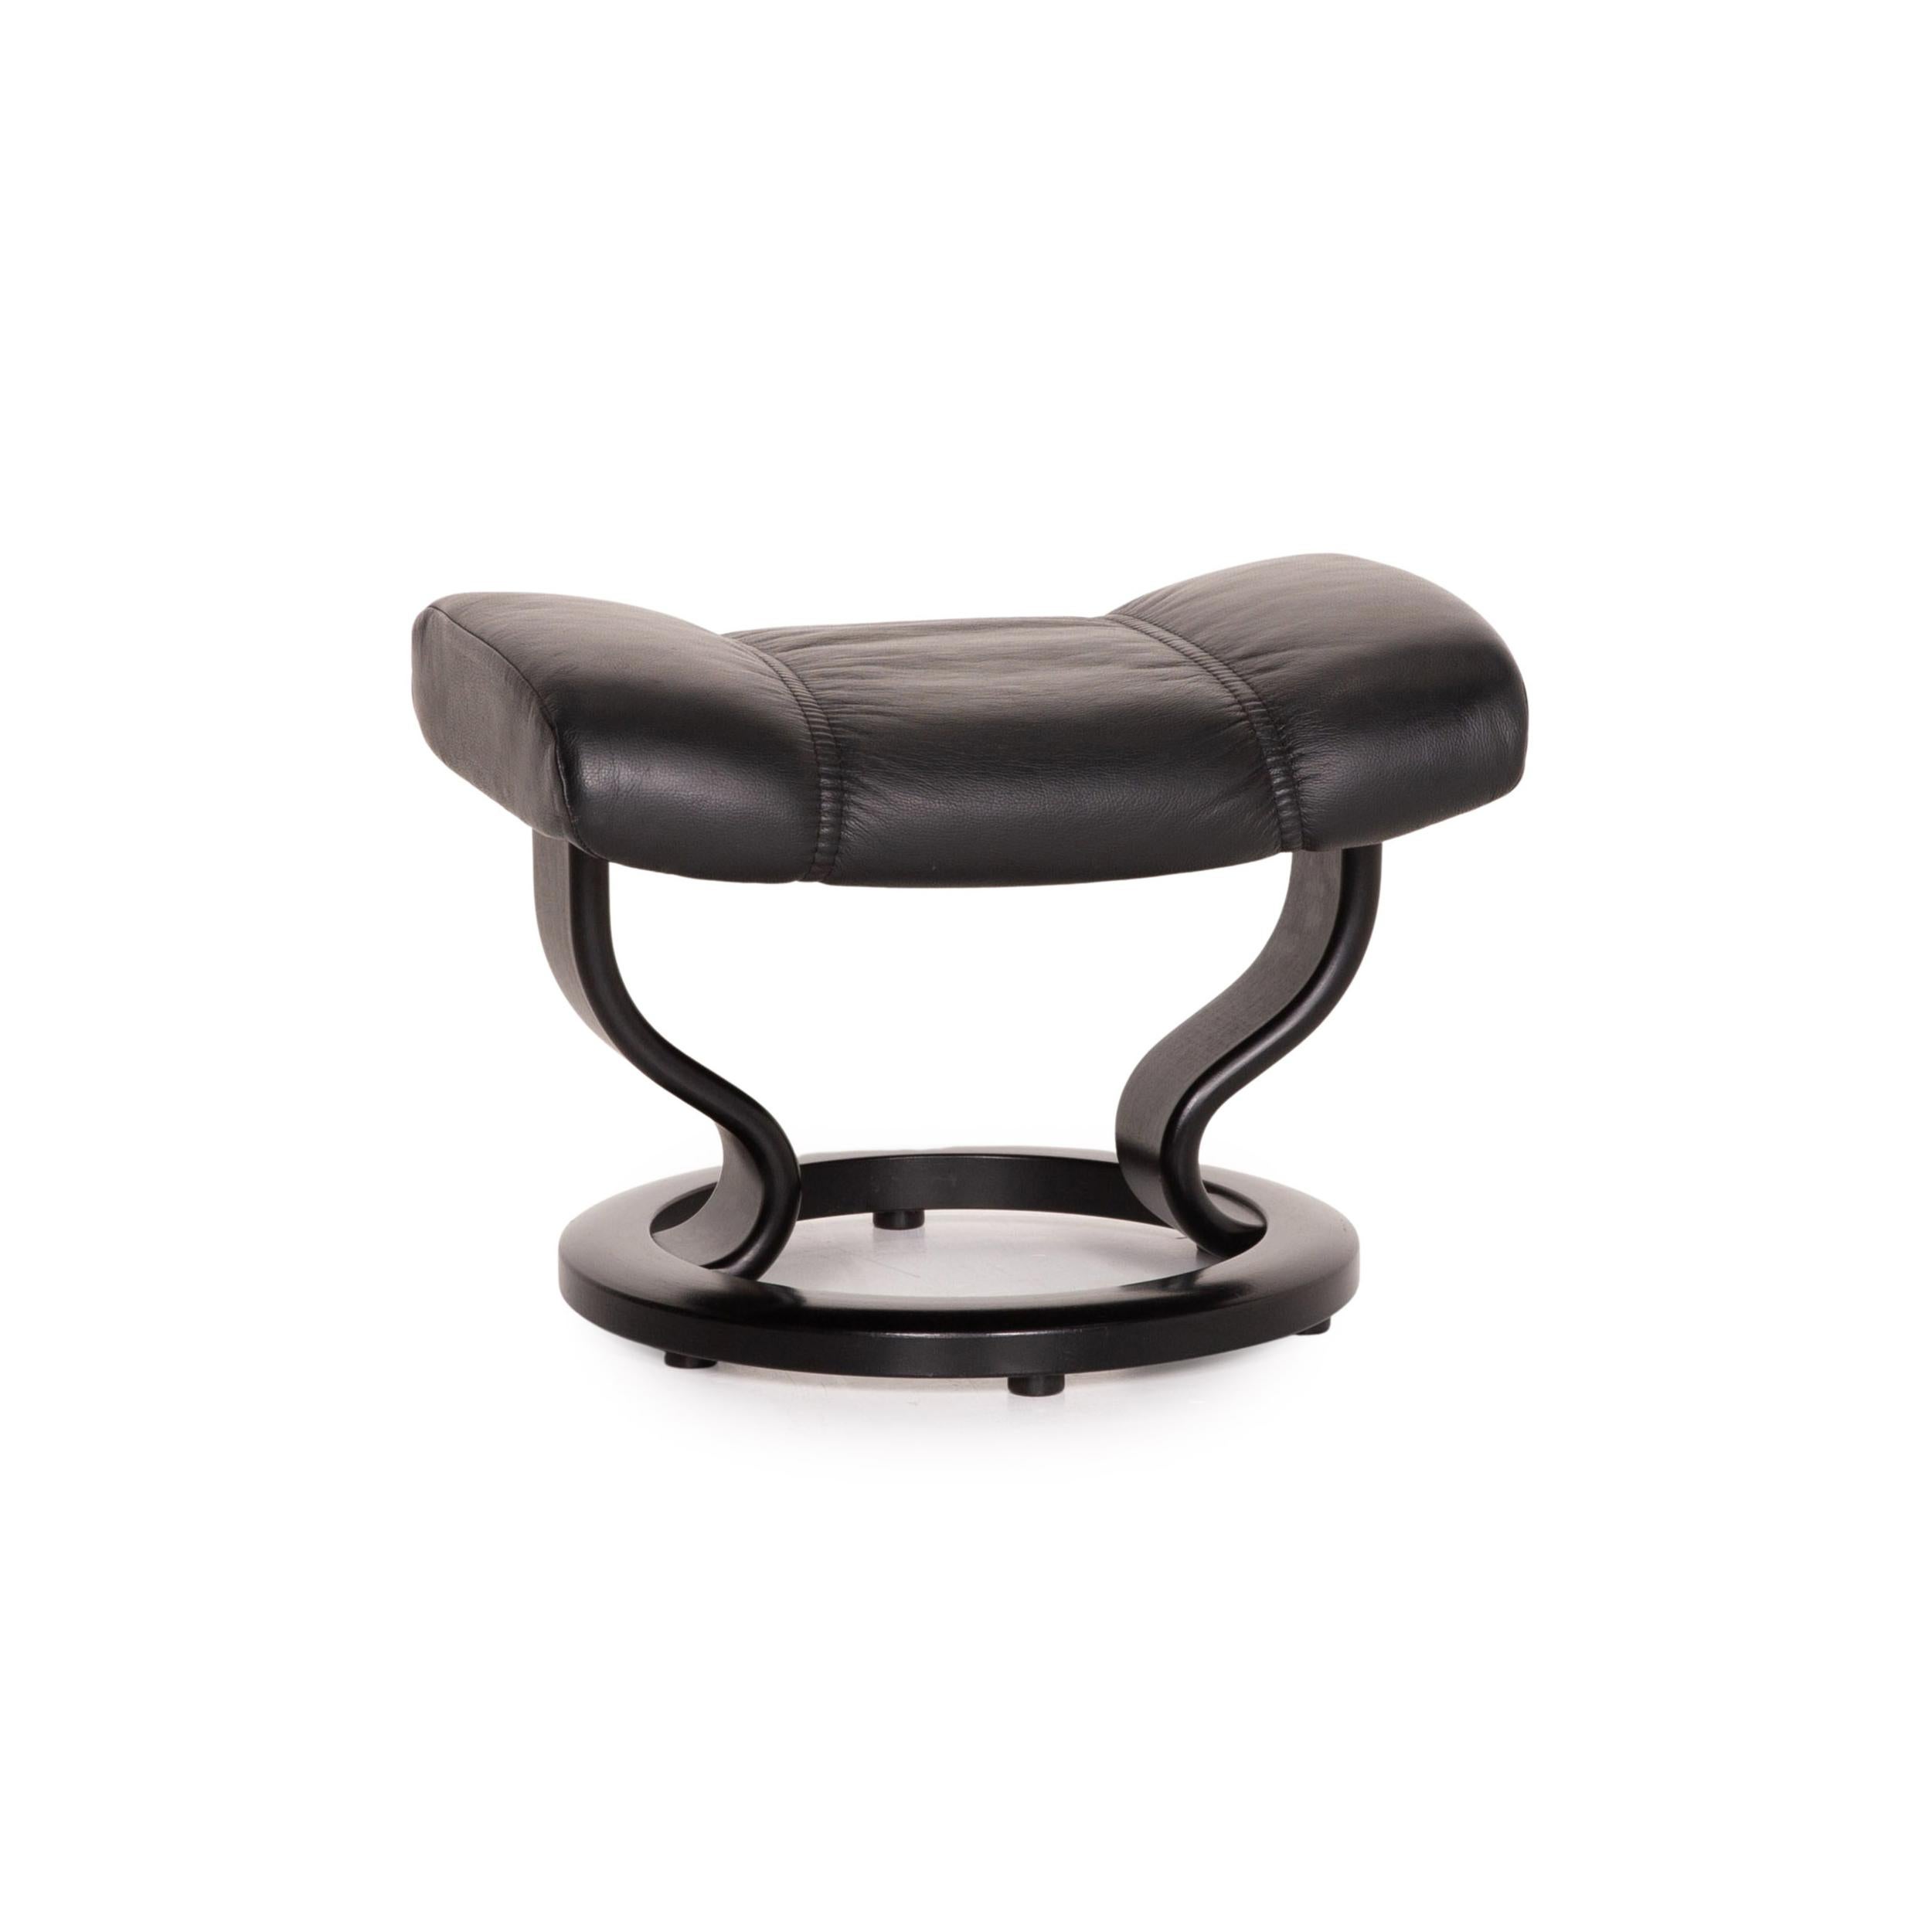 Stressless Consul Leather Armchair Incl. Stool Black Function Relaxation For Sale 10